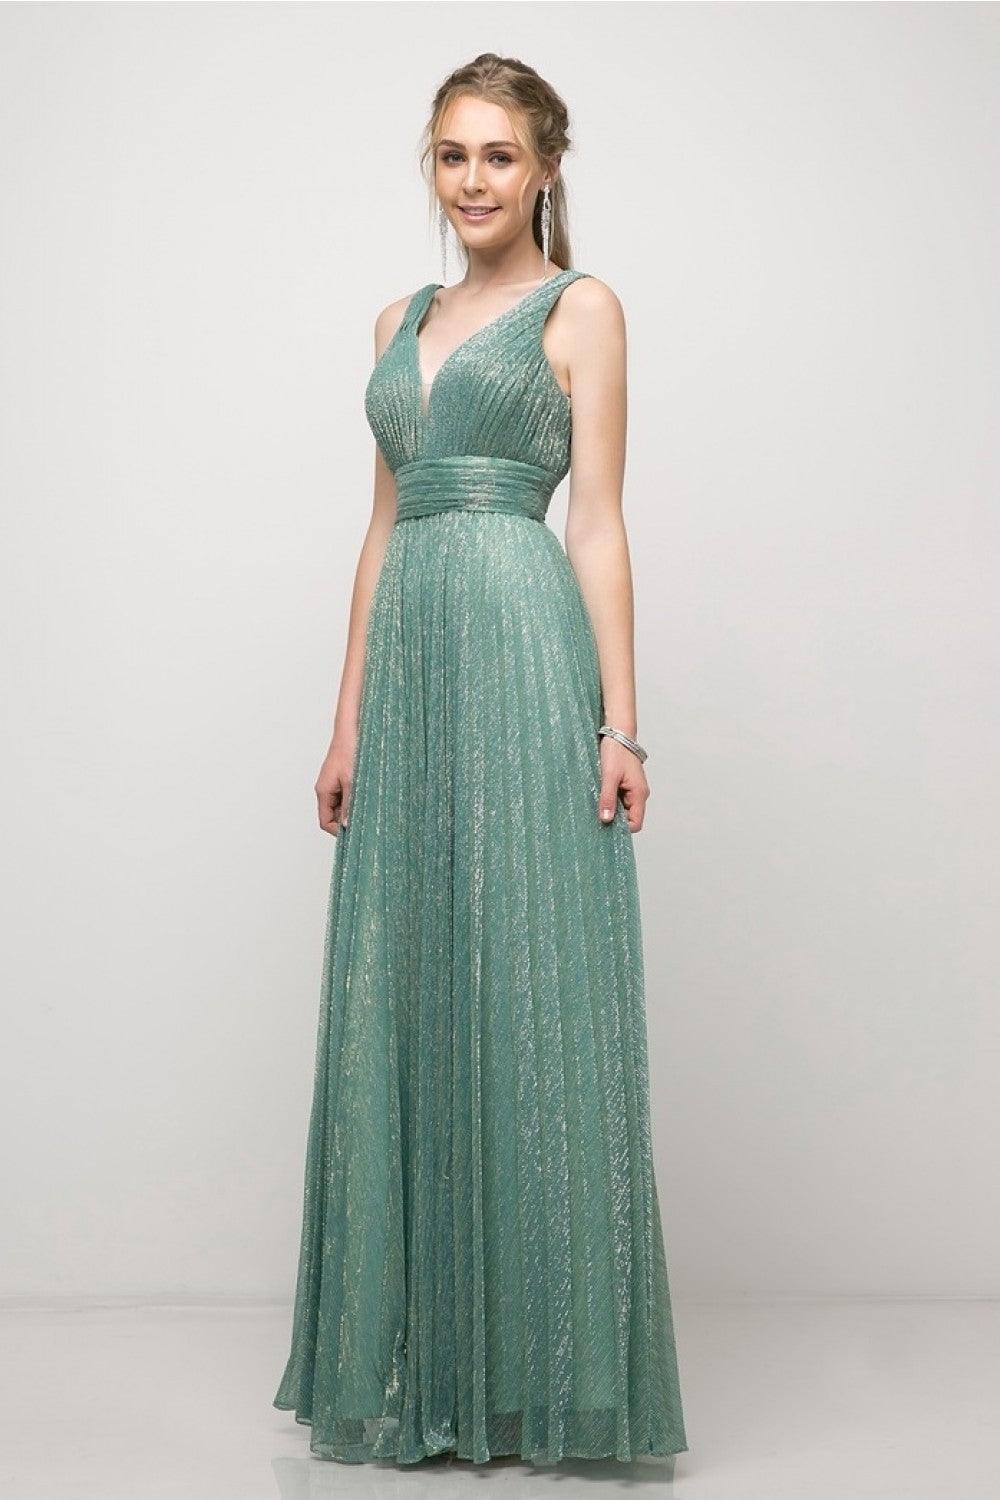 Long Sleeveless Prom Dress Evening Gown - The Dress Outlet Cinderella Divine